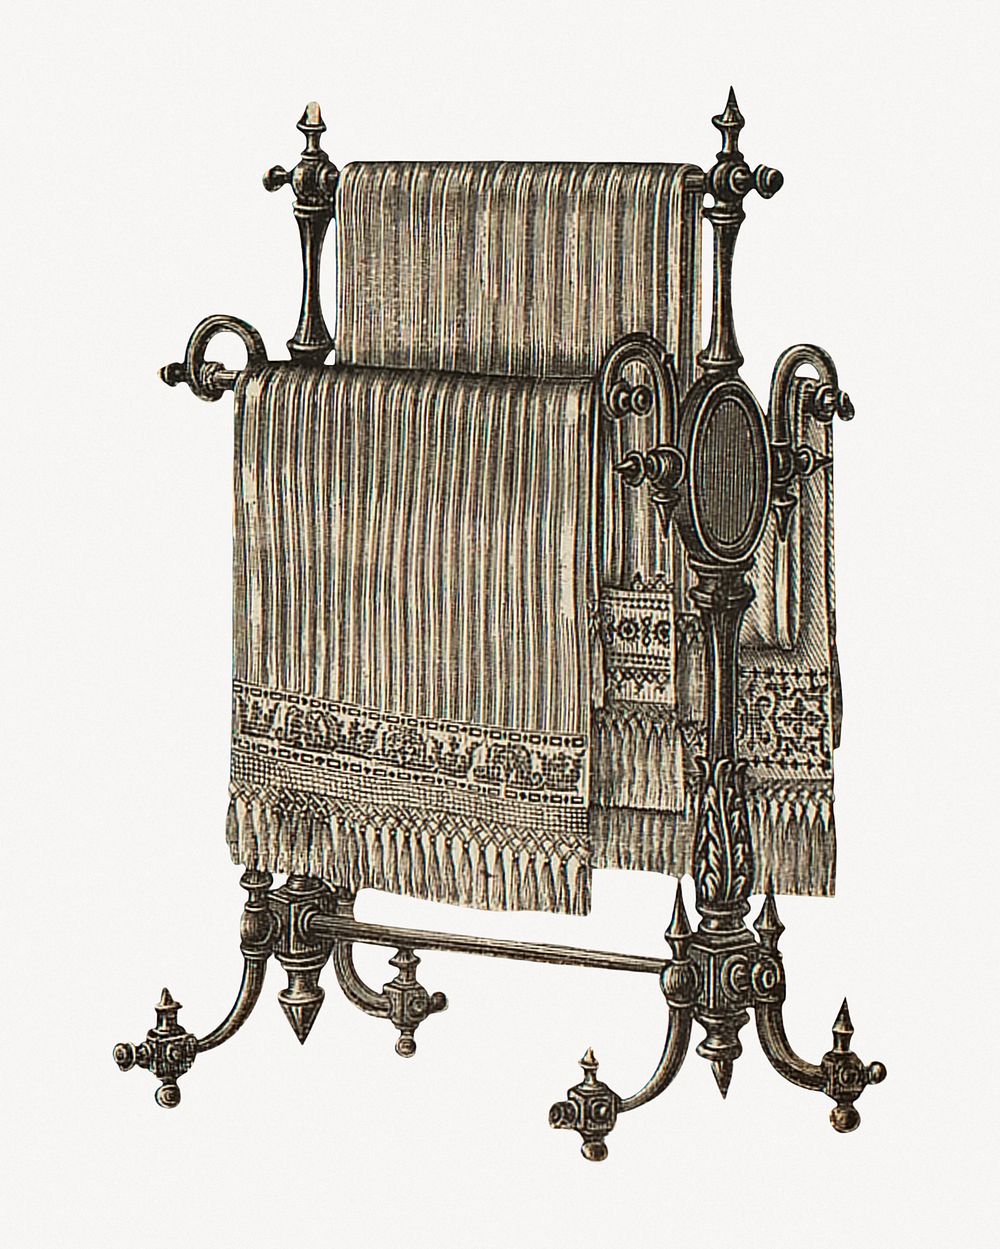 Victorian towel rail, vintage object illustration.  Remastered by rawpixel.